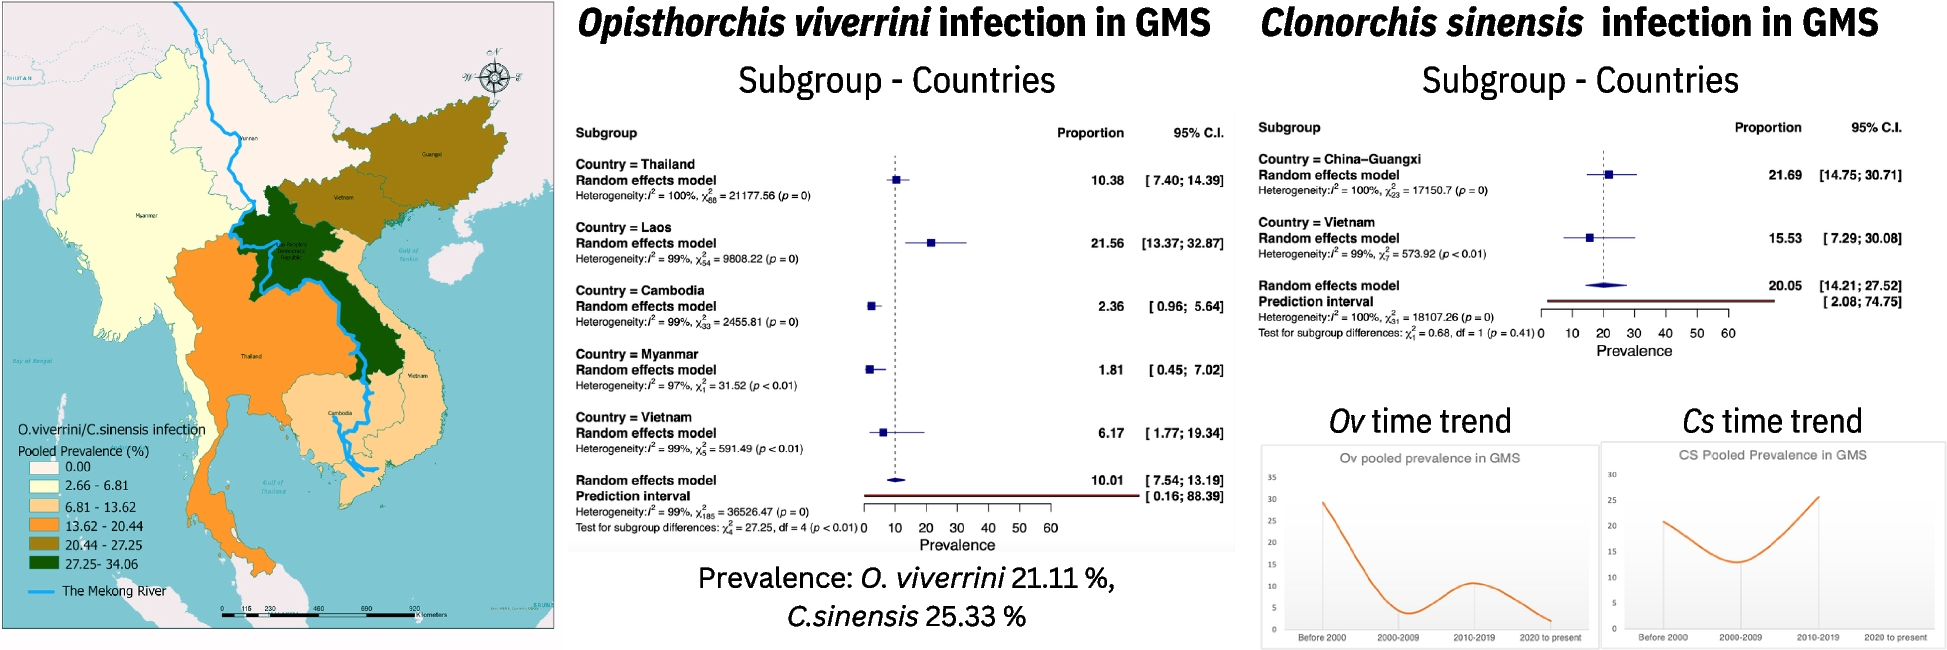 Prevalence estimates of Opisthorchis viverrini and Clonorchis sinensis infection in the Greater Mekong subregion: a systematic review and meta-analysis